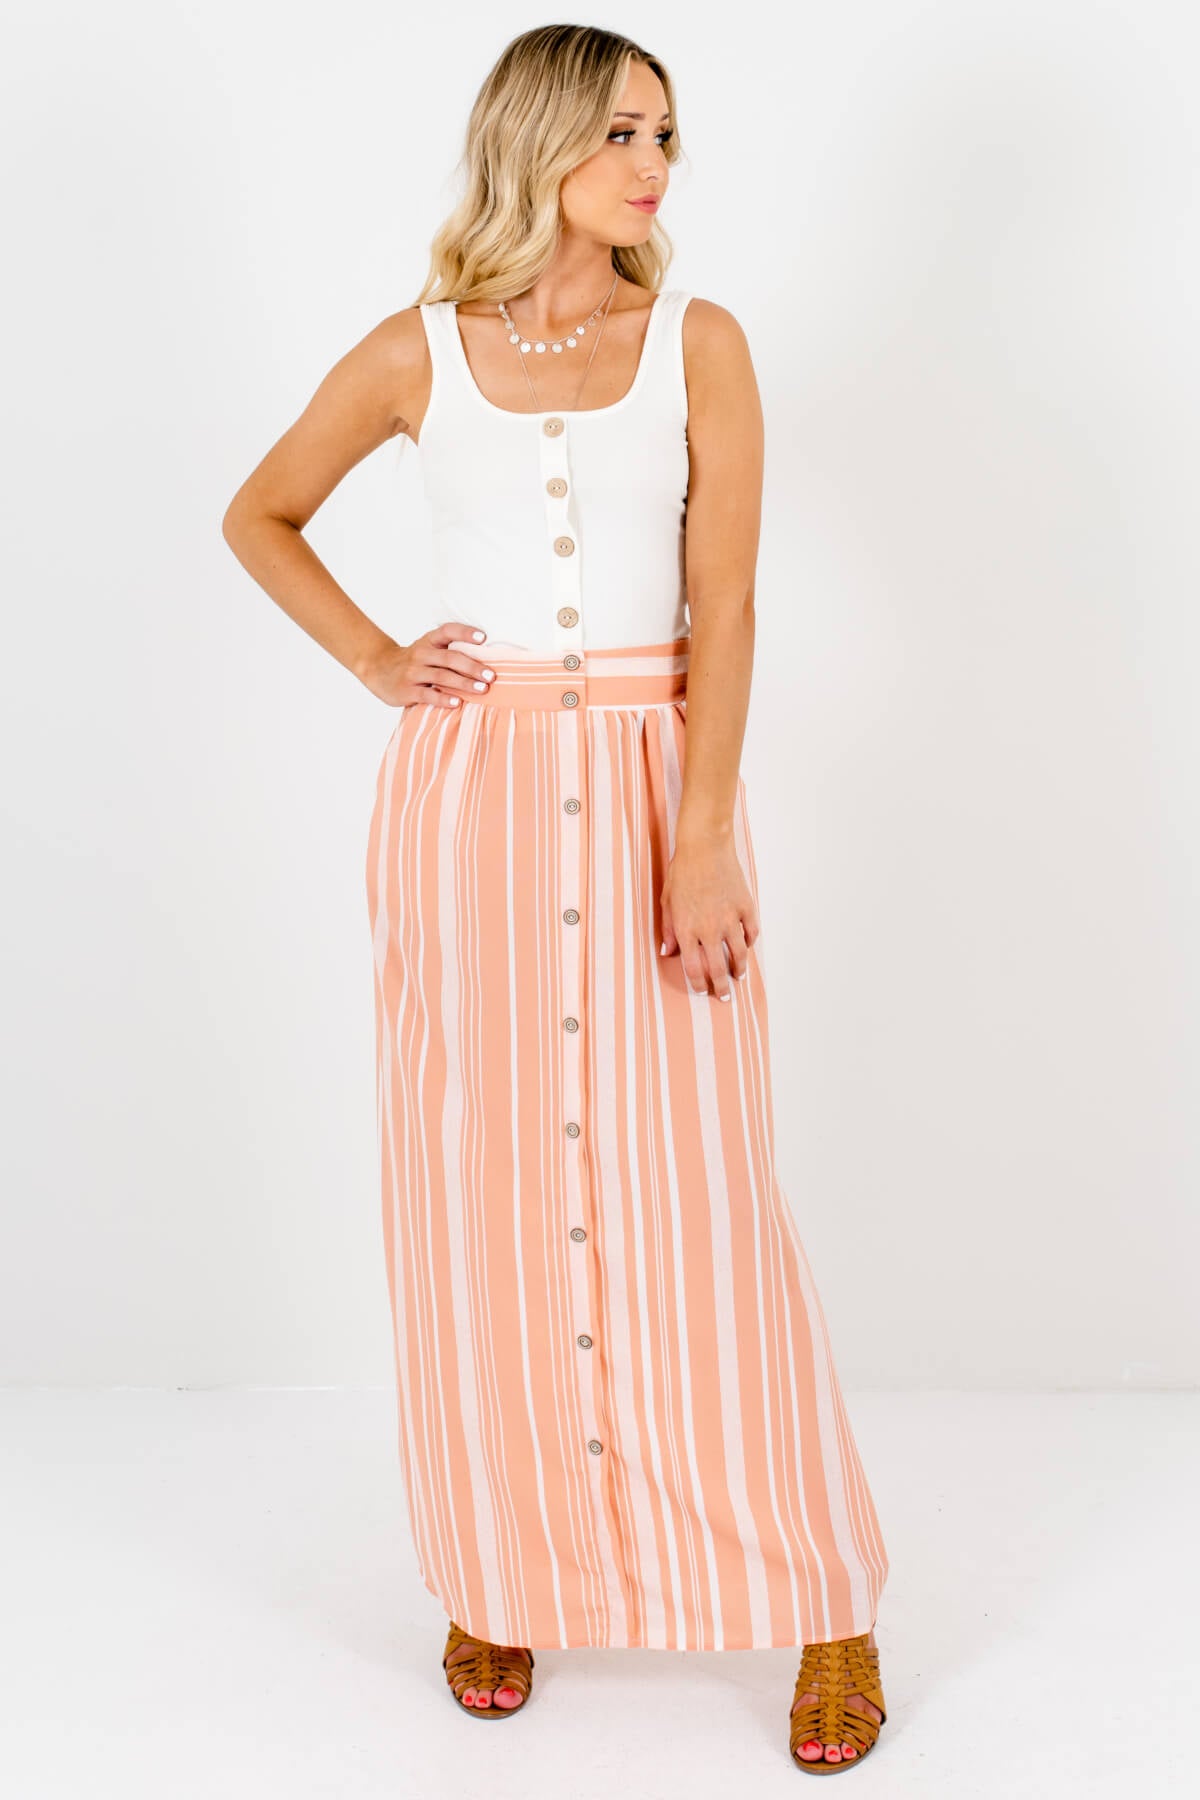 Women's Peach Pink Spring and Summertime Boutique Clothing